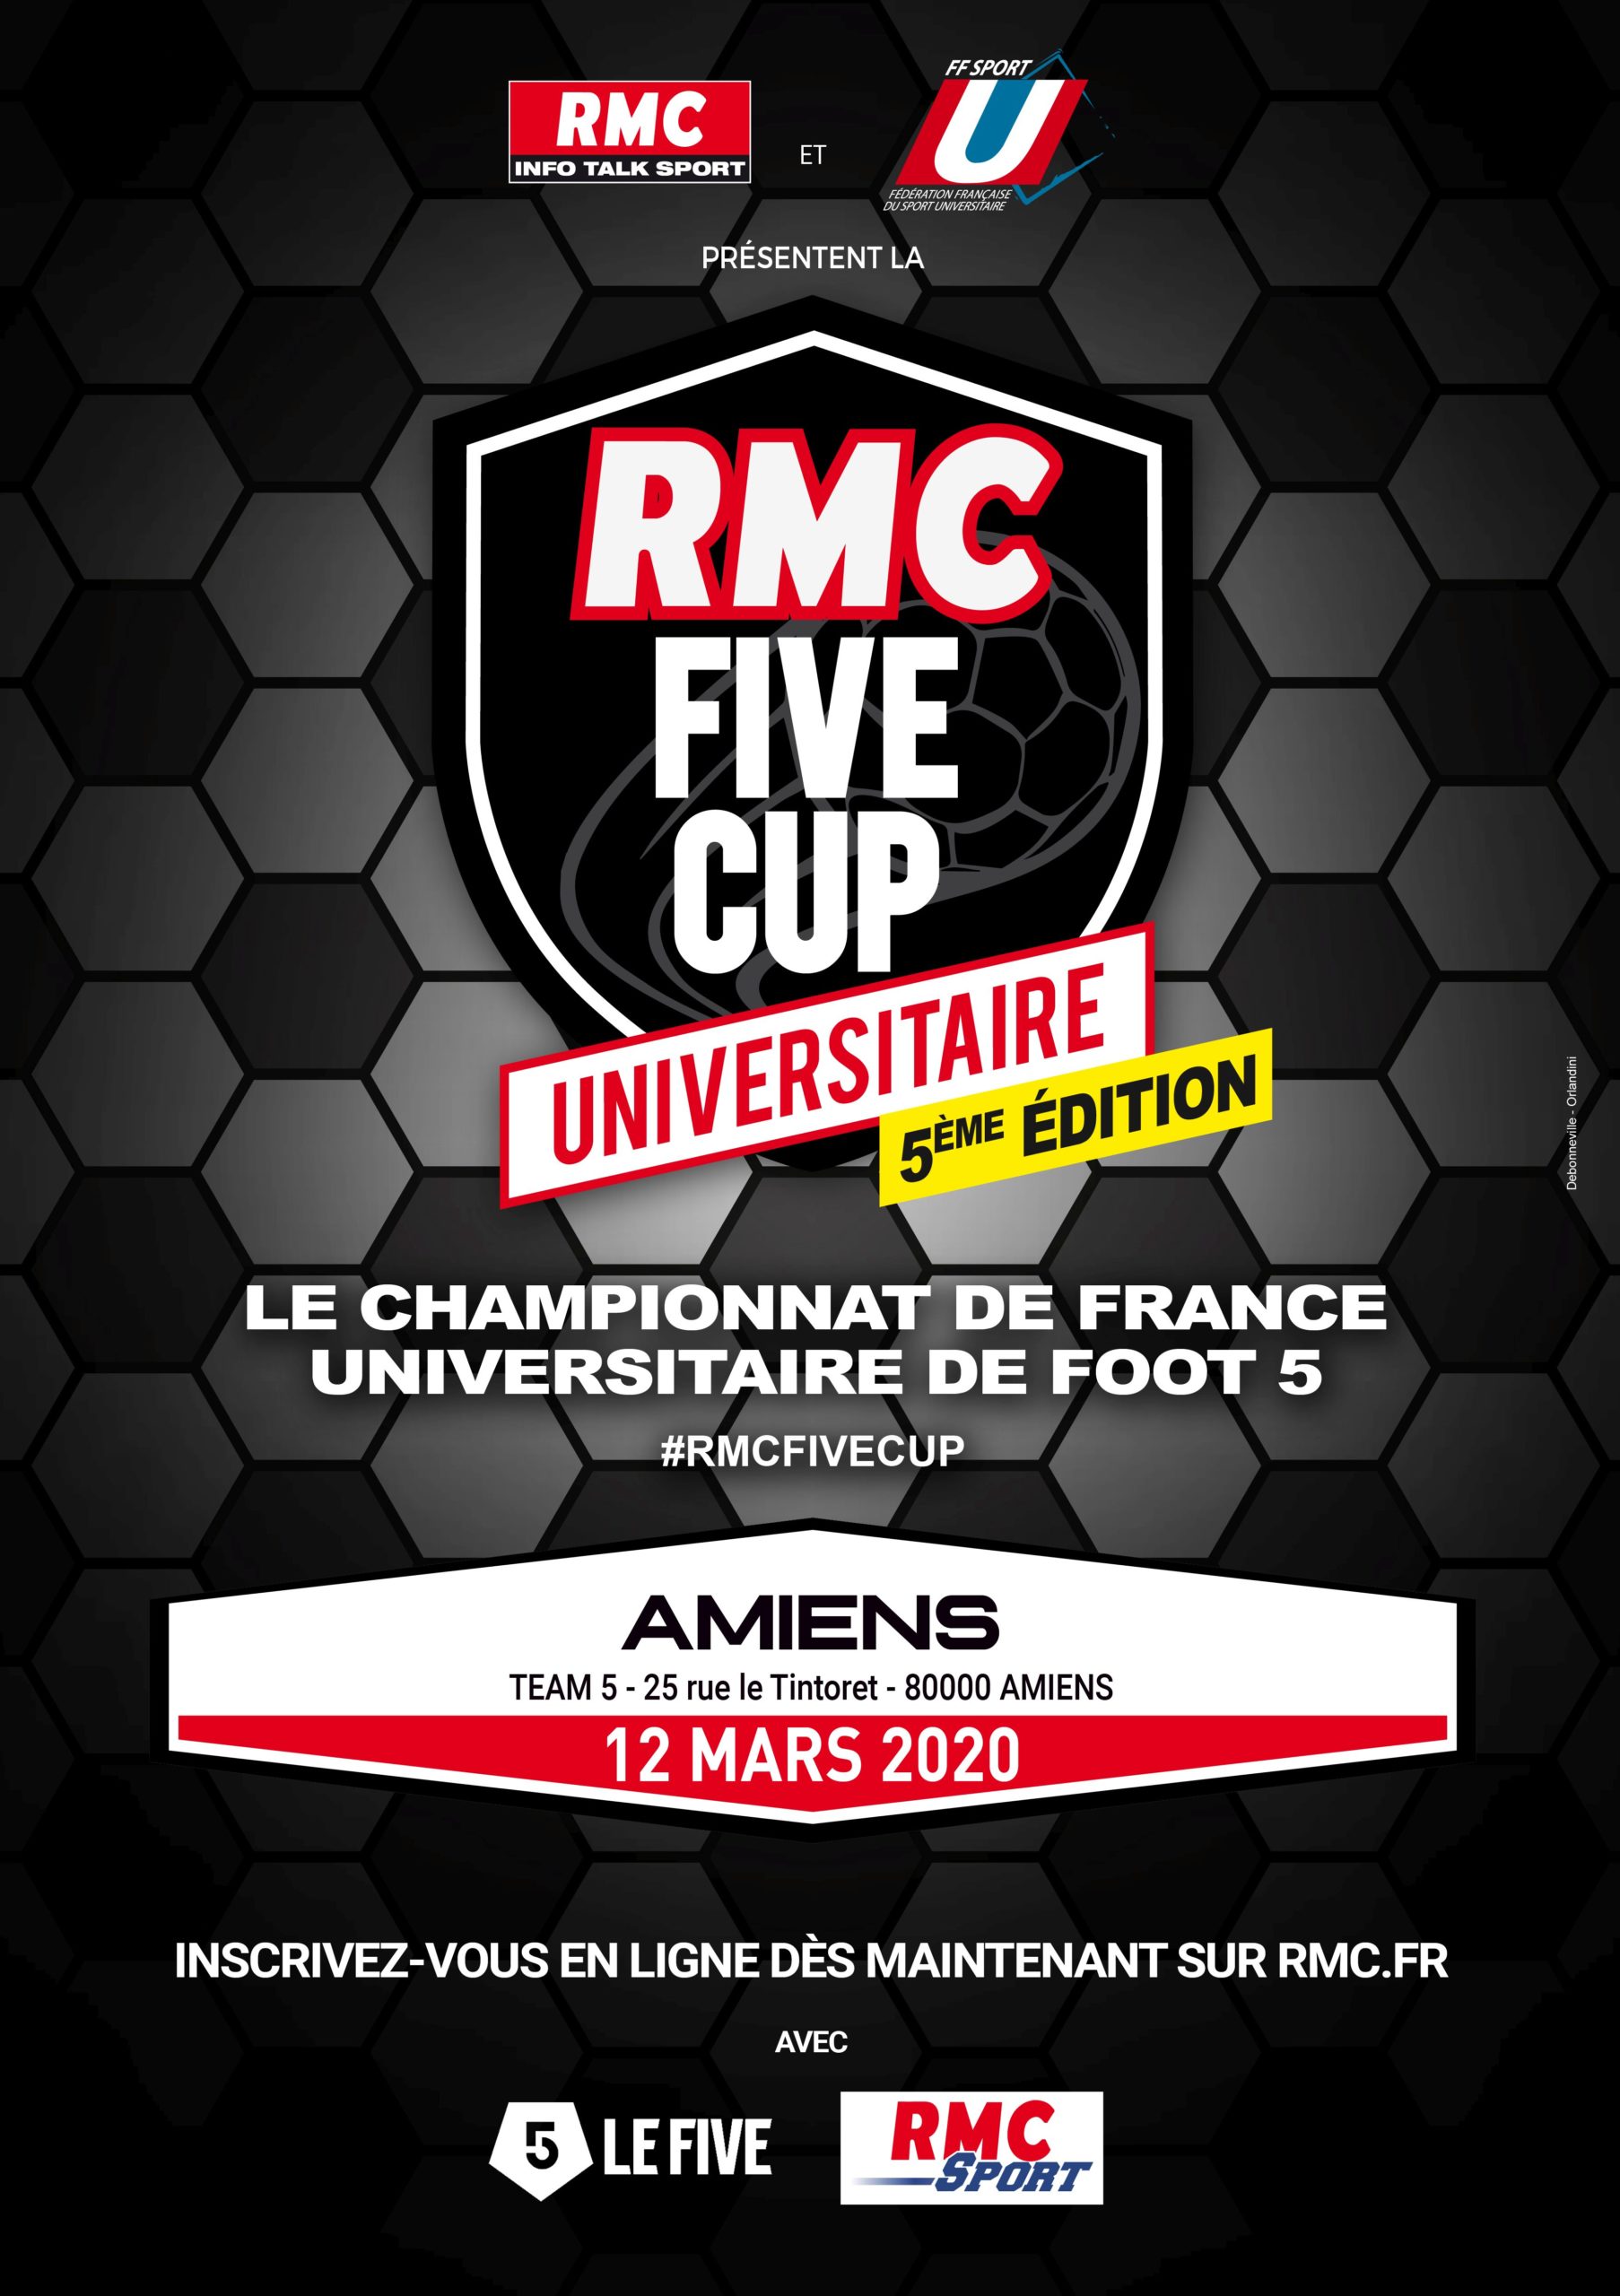 Amiens 2020 Affiche A3 Rmc Five Cup